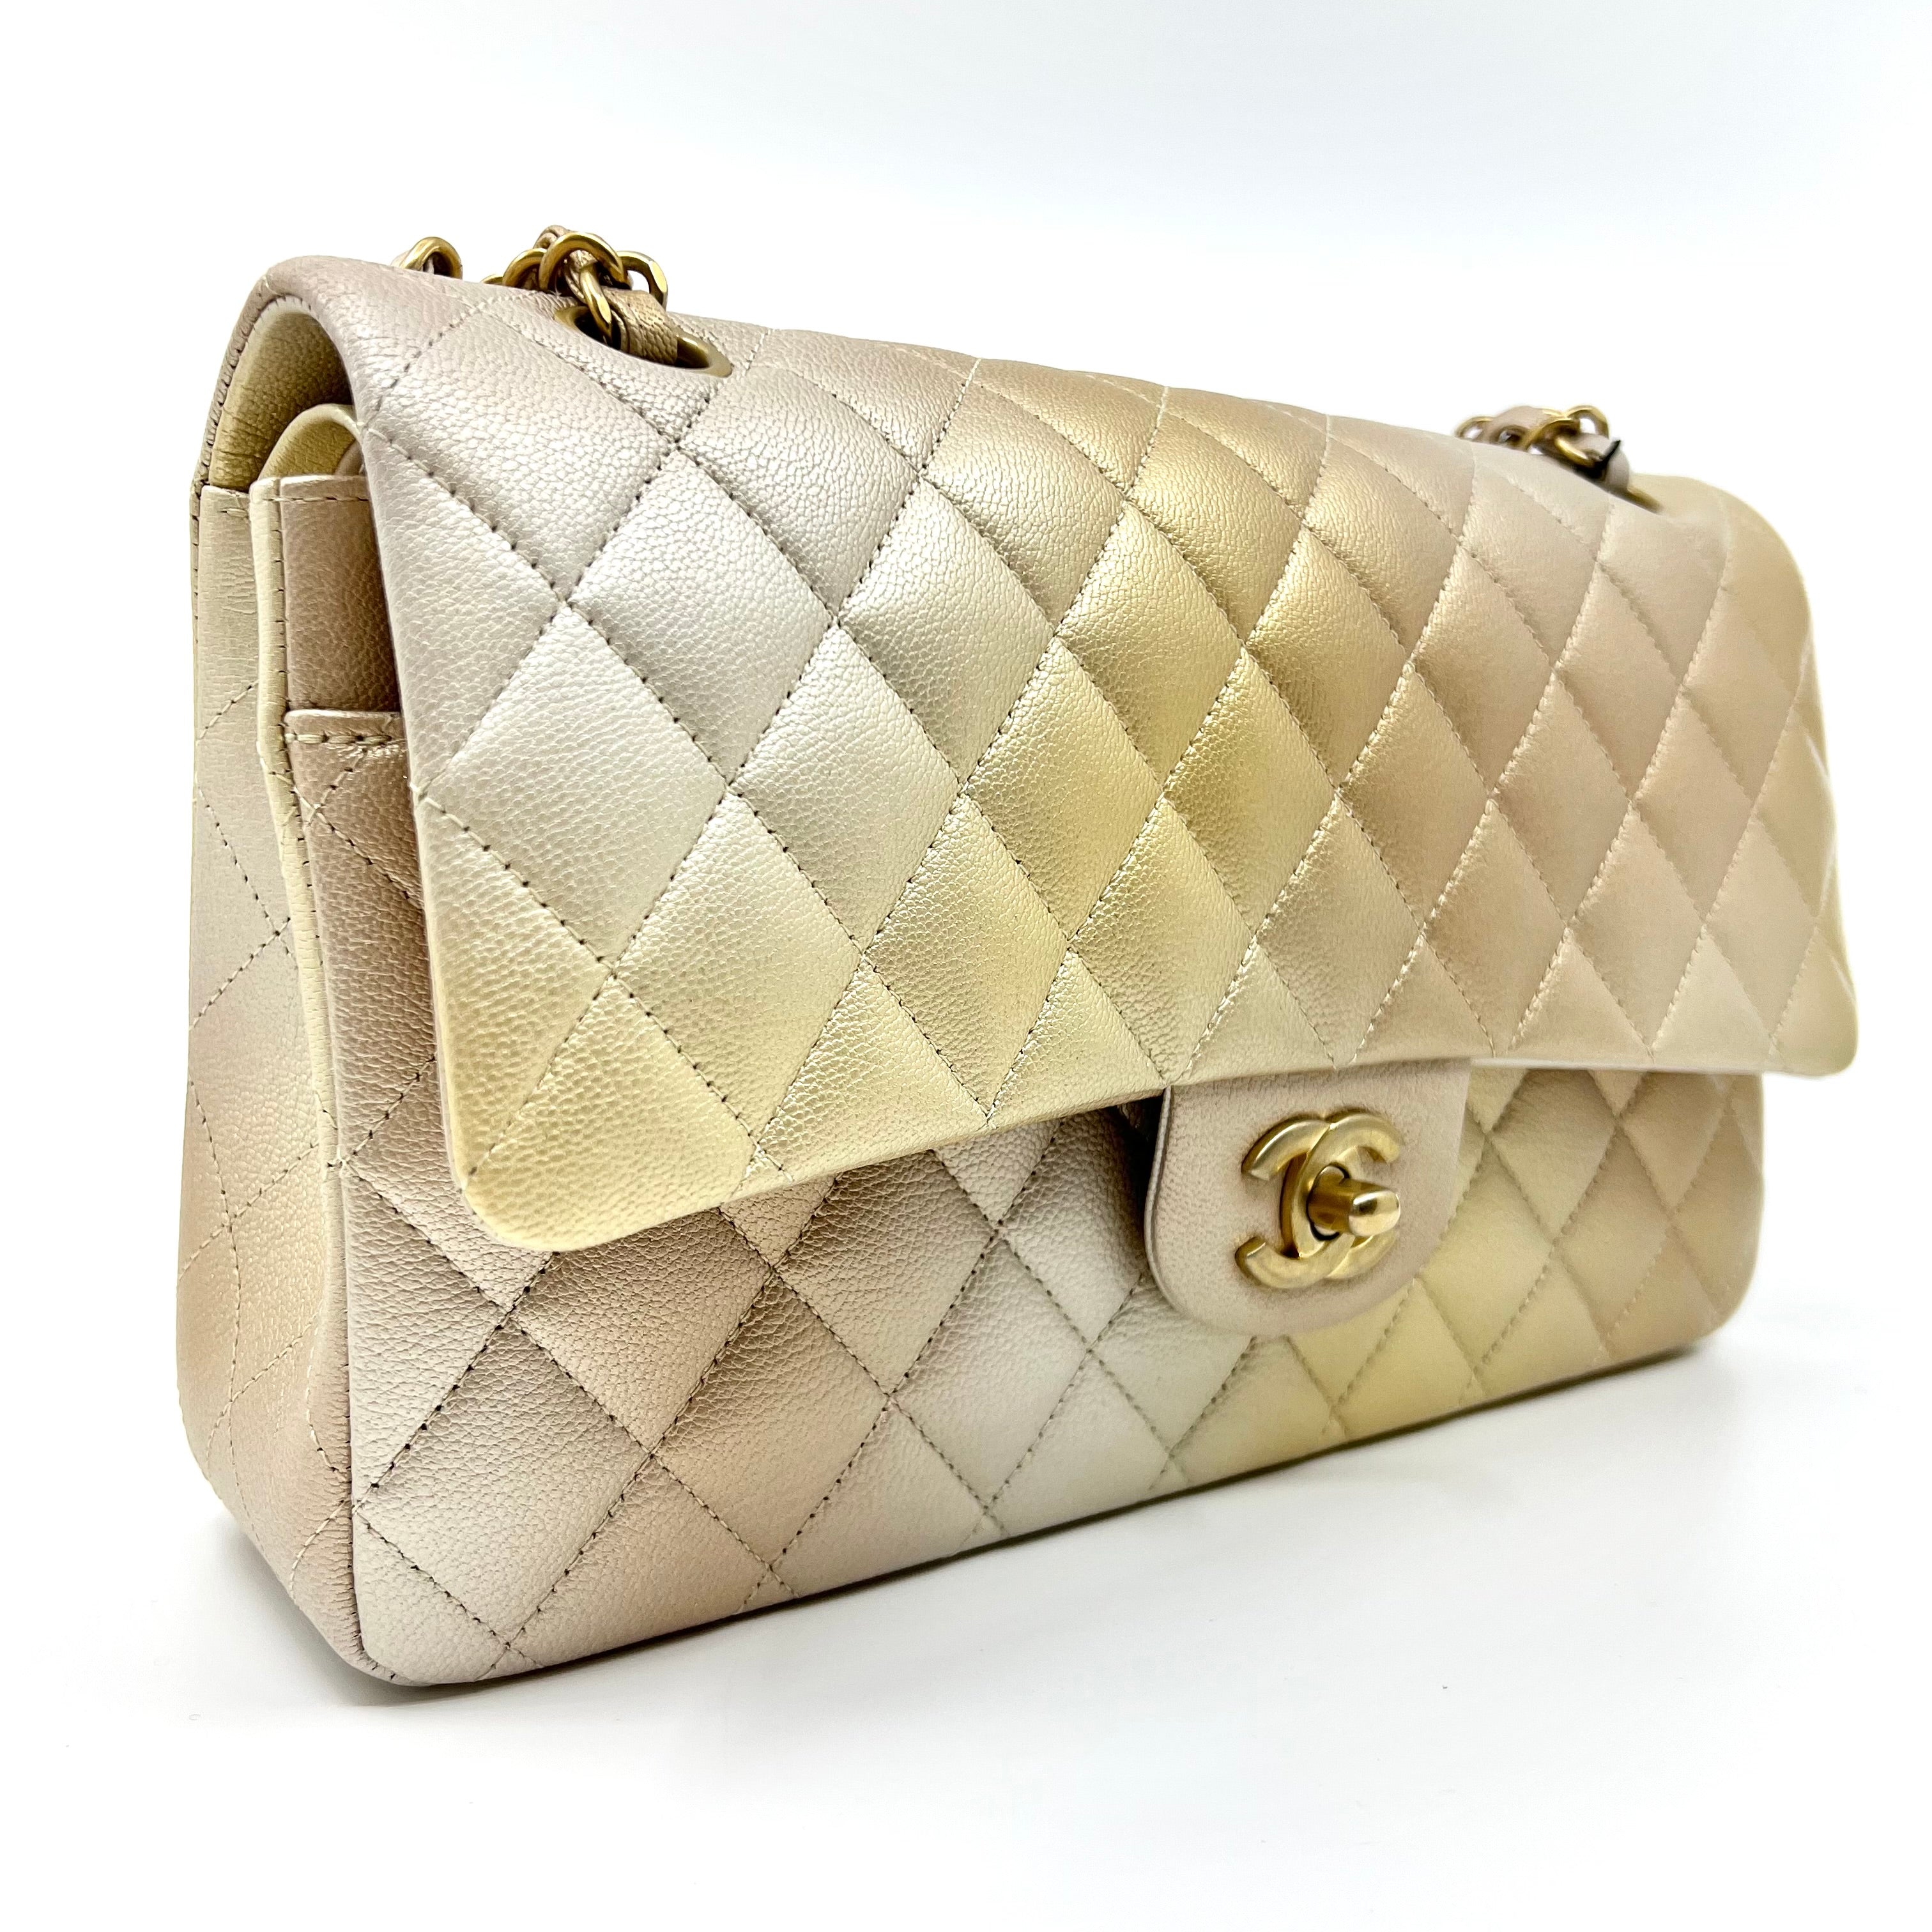 2022 Year CHANEL Classic Iridescent Lambskin Quilted Medium Double